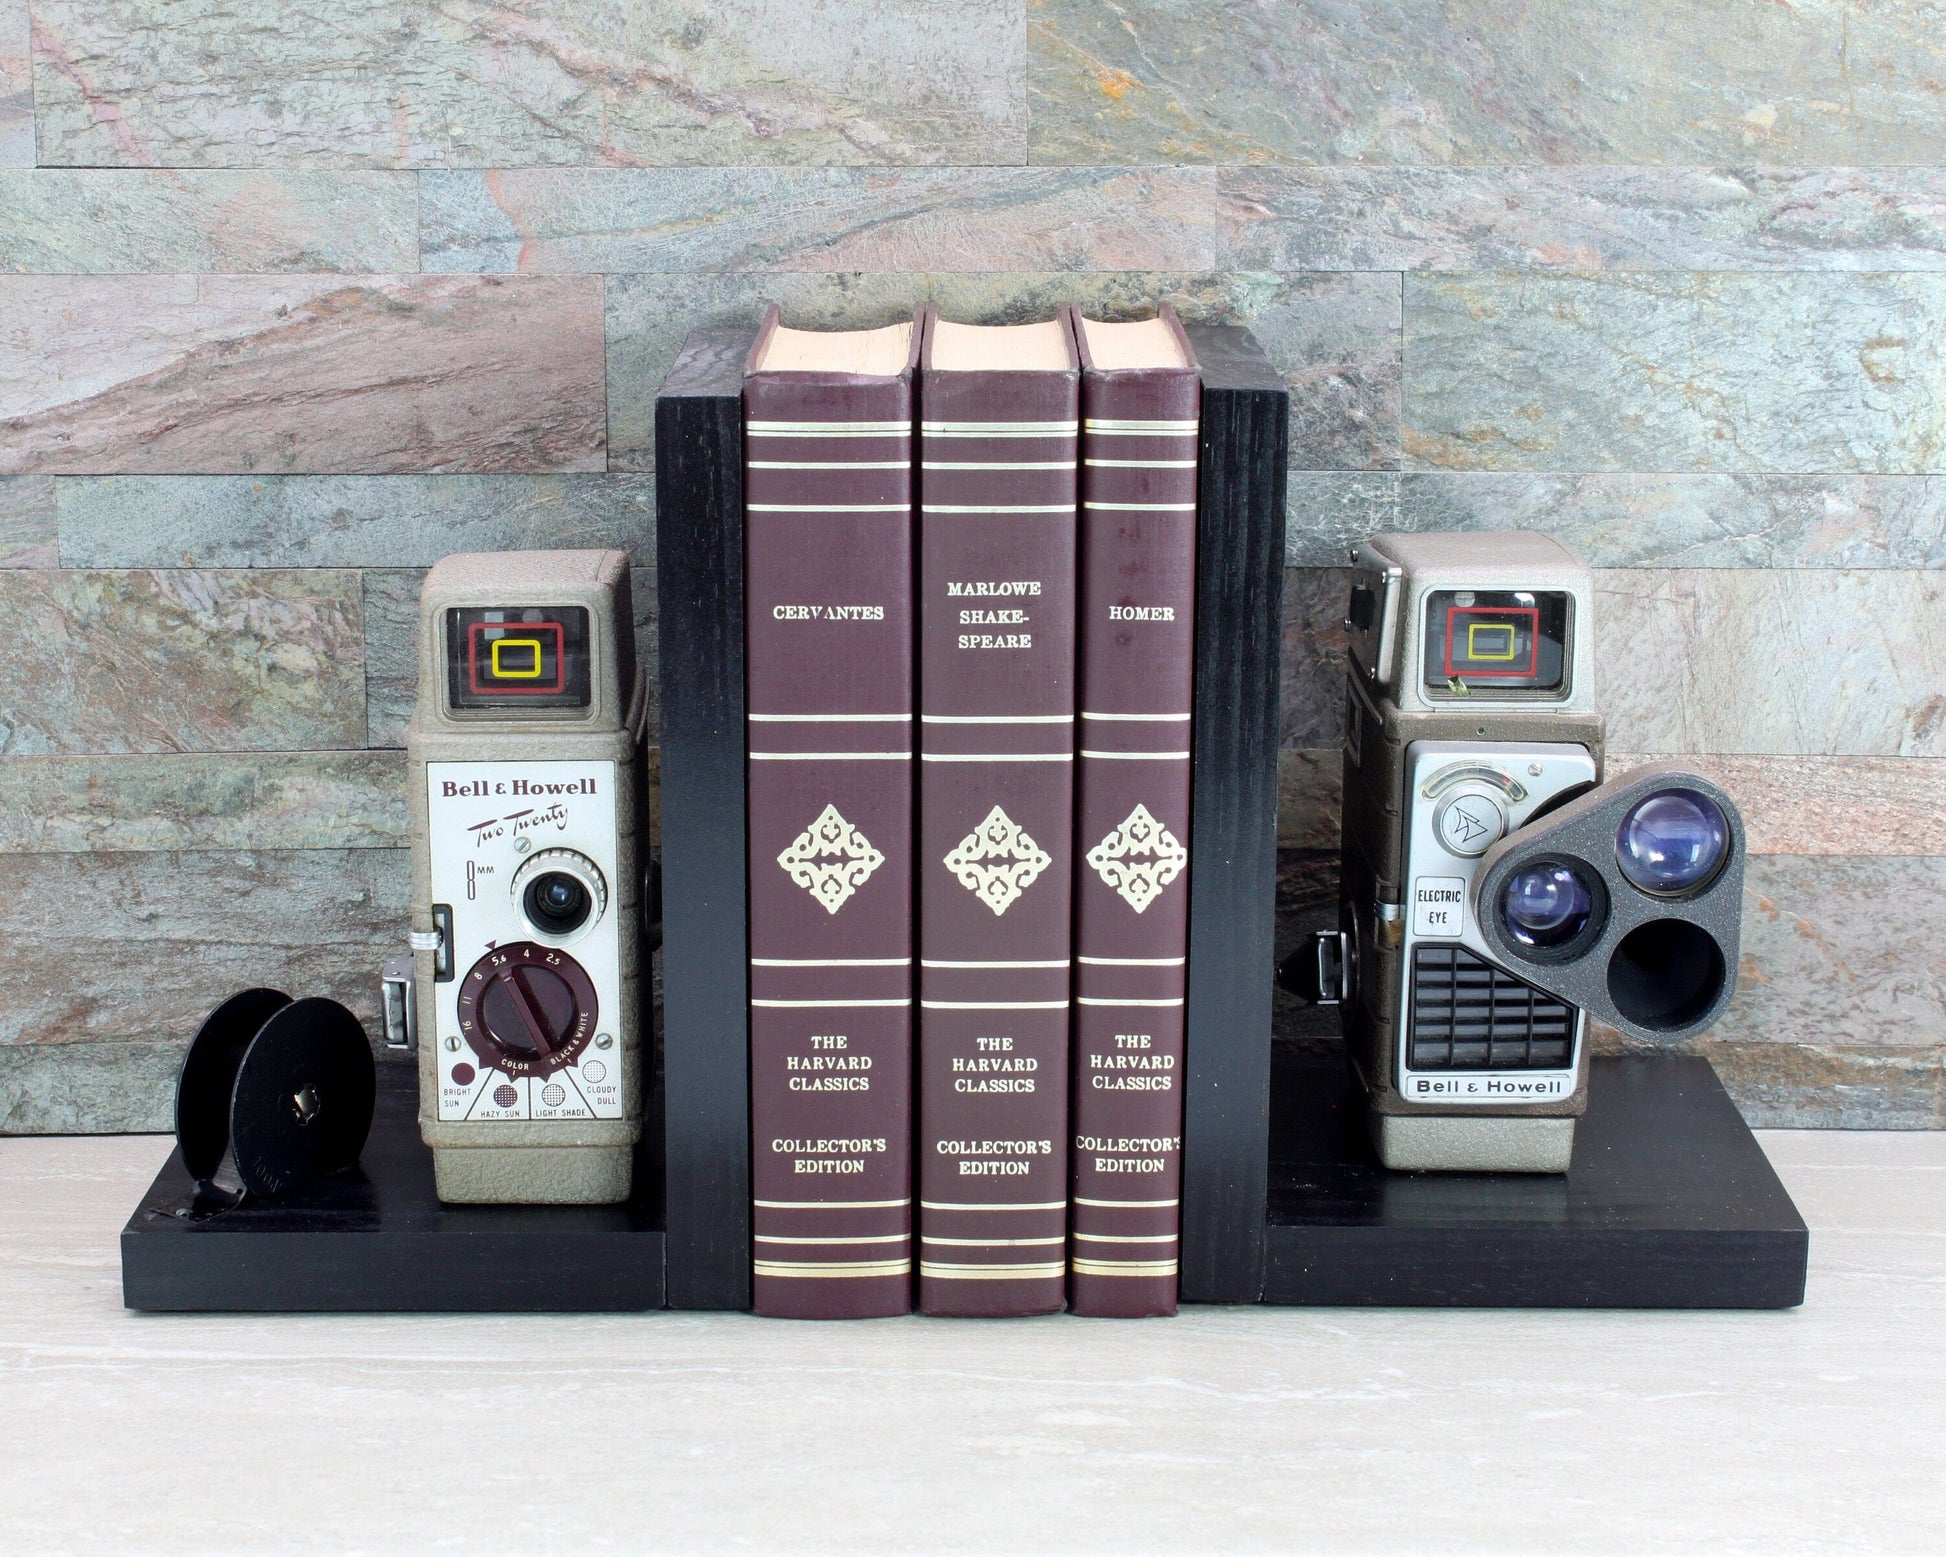 LightAndTimeArt Bookends Vintage Movie Camera Bookends, DVD Holder, Bell & Howell, Movie Theater Décor, Movie Maker Gift, Git for Actor and Actress